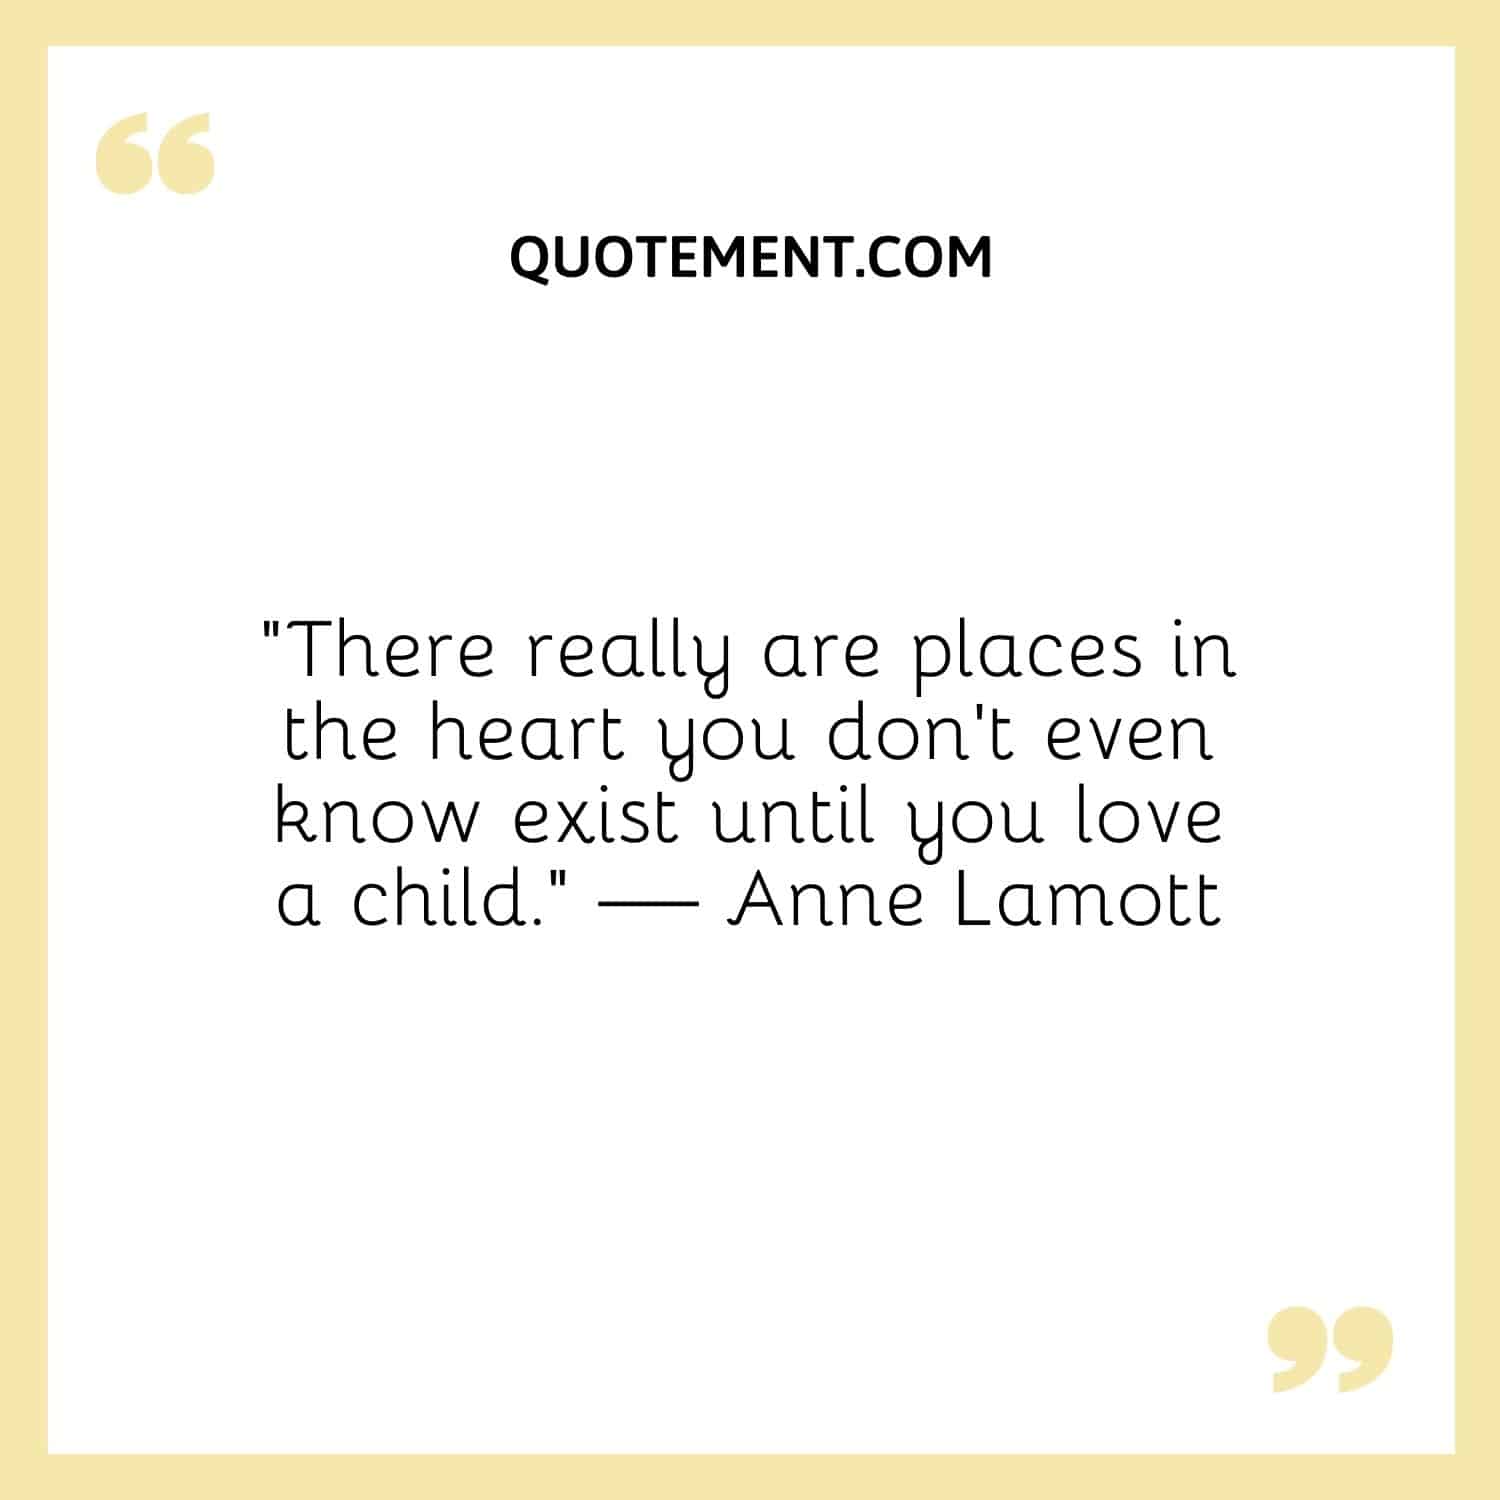 “There really are places in the heart you don’t even know exist until you love a child.” — Anne Lamott